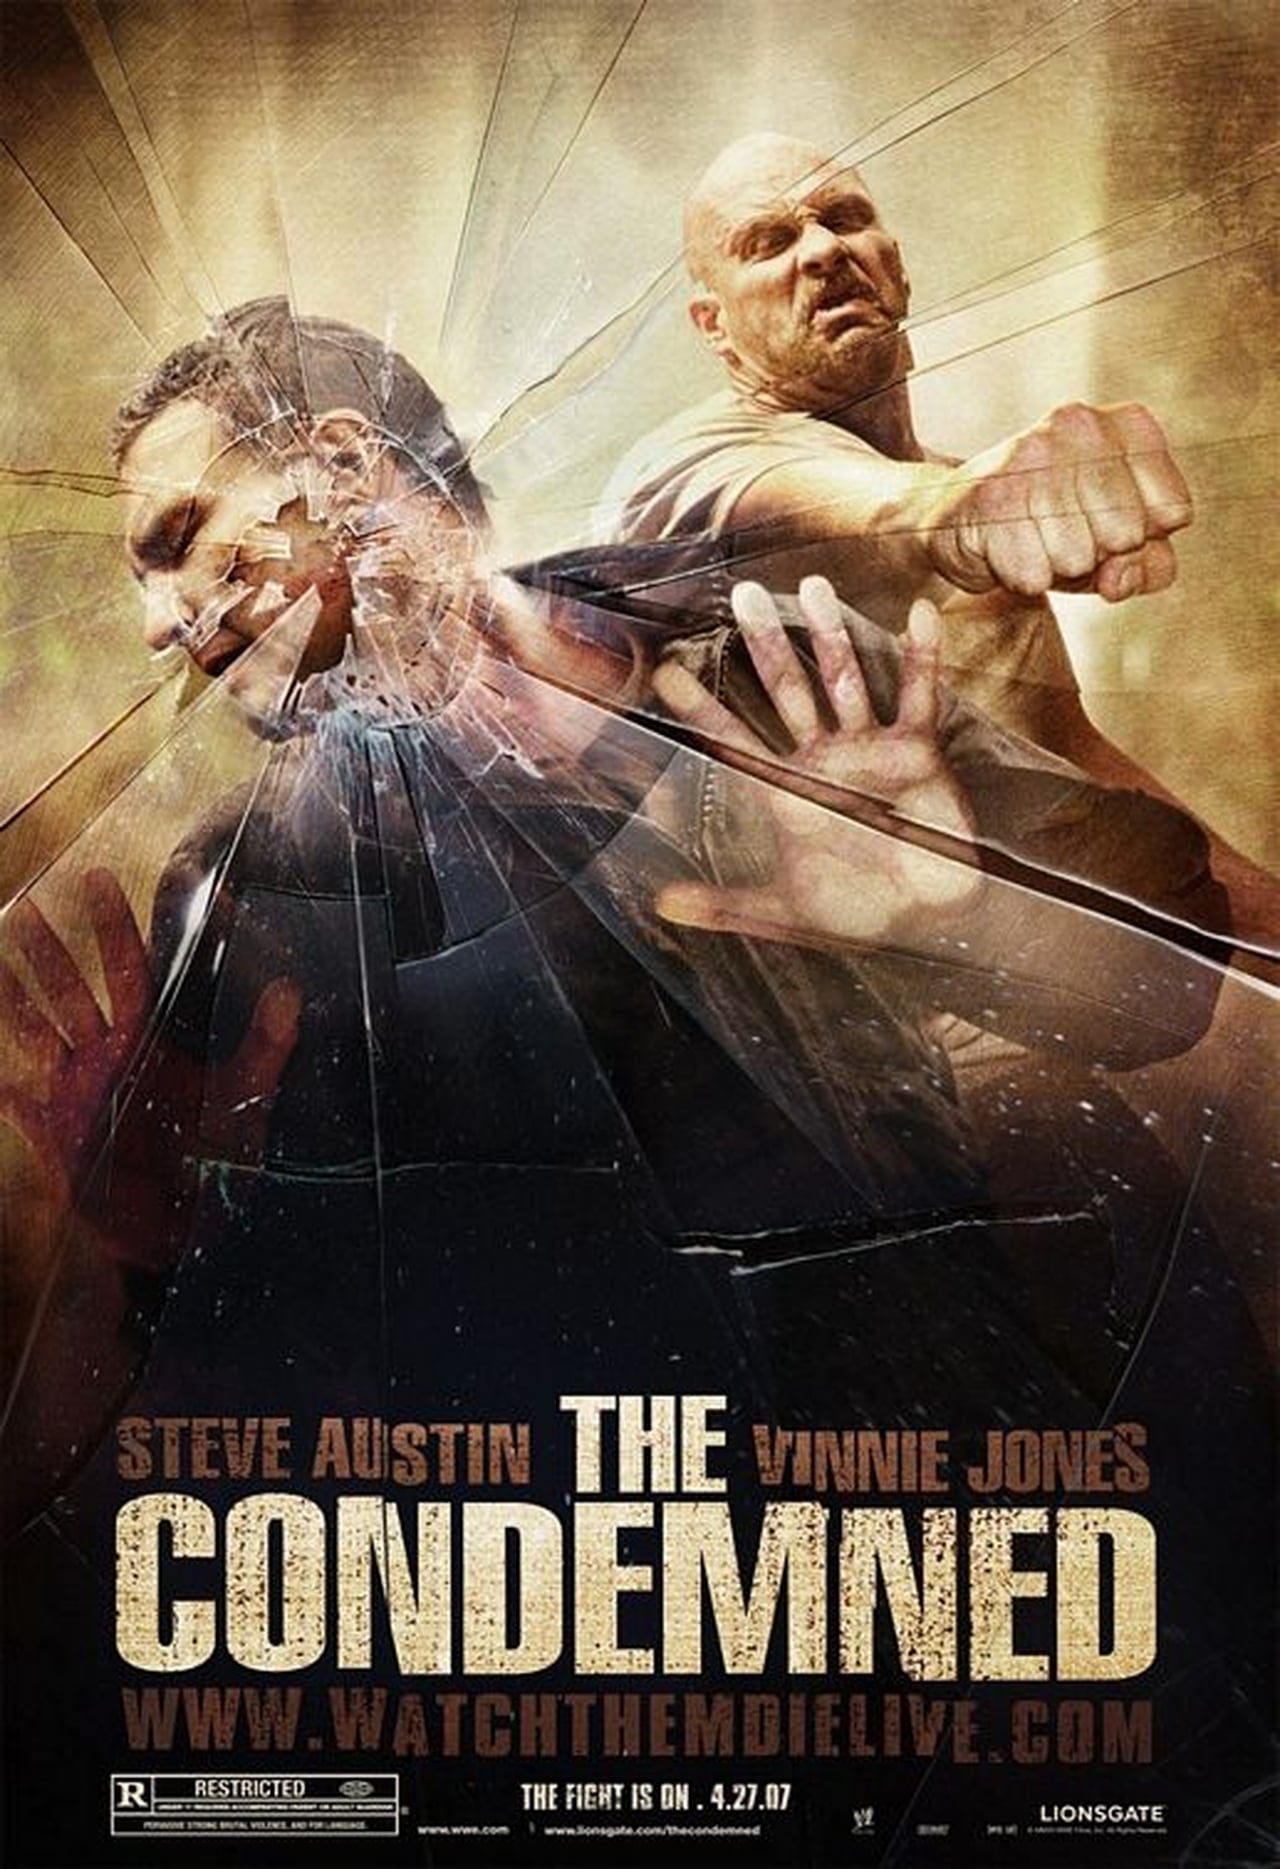 The Condemned (2007) Internal Versions 192Kbps 23.976Fps 48Khz 2.0Ch DVD Turkish Audio TAC